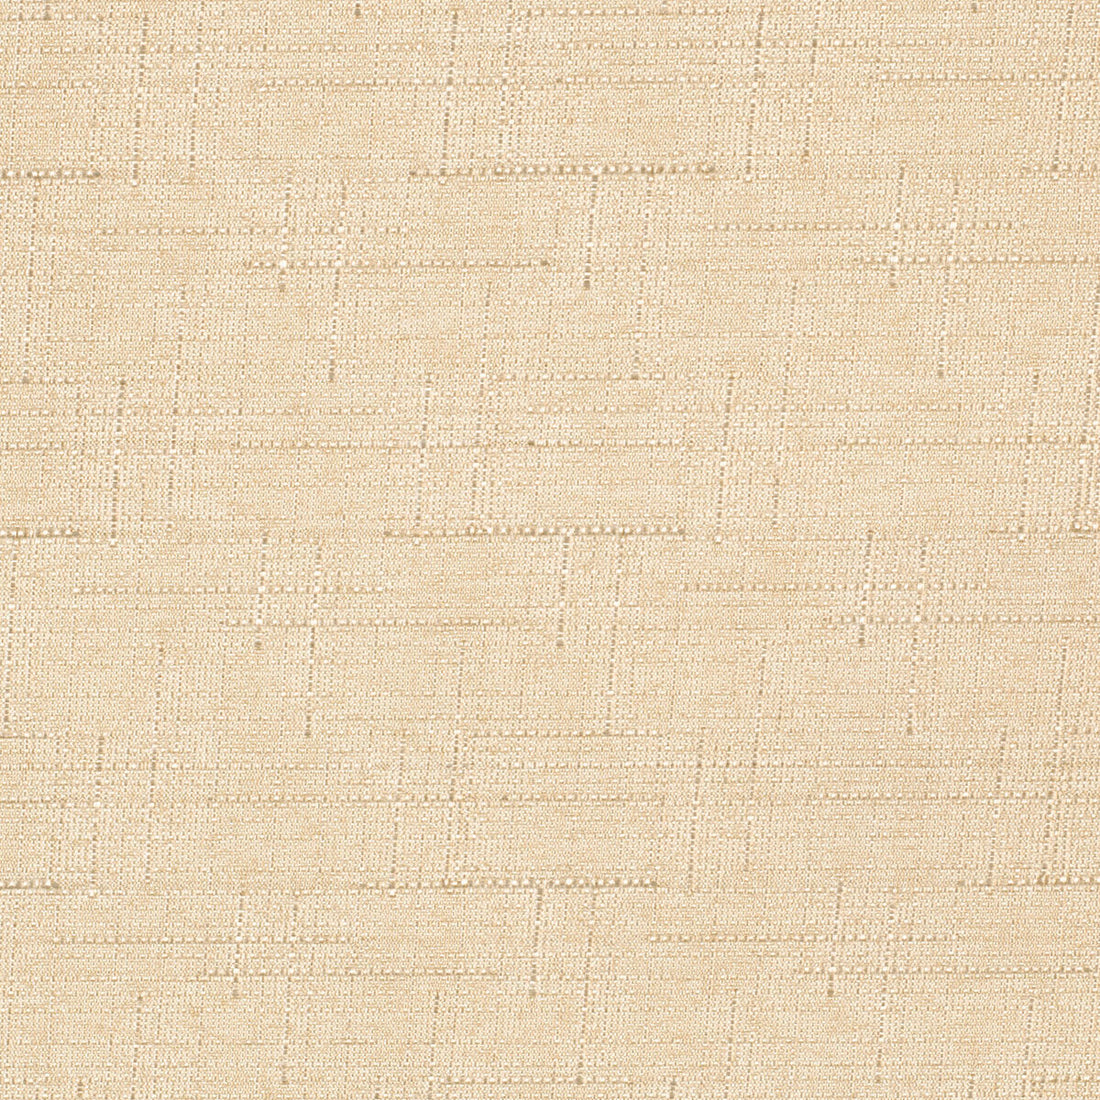 Kravet Contract fabric in 4321-1116 color - pattern 4321.1116.0 - by Kravet Contract